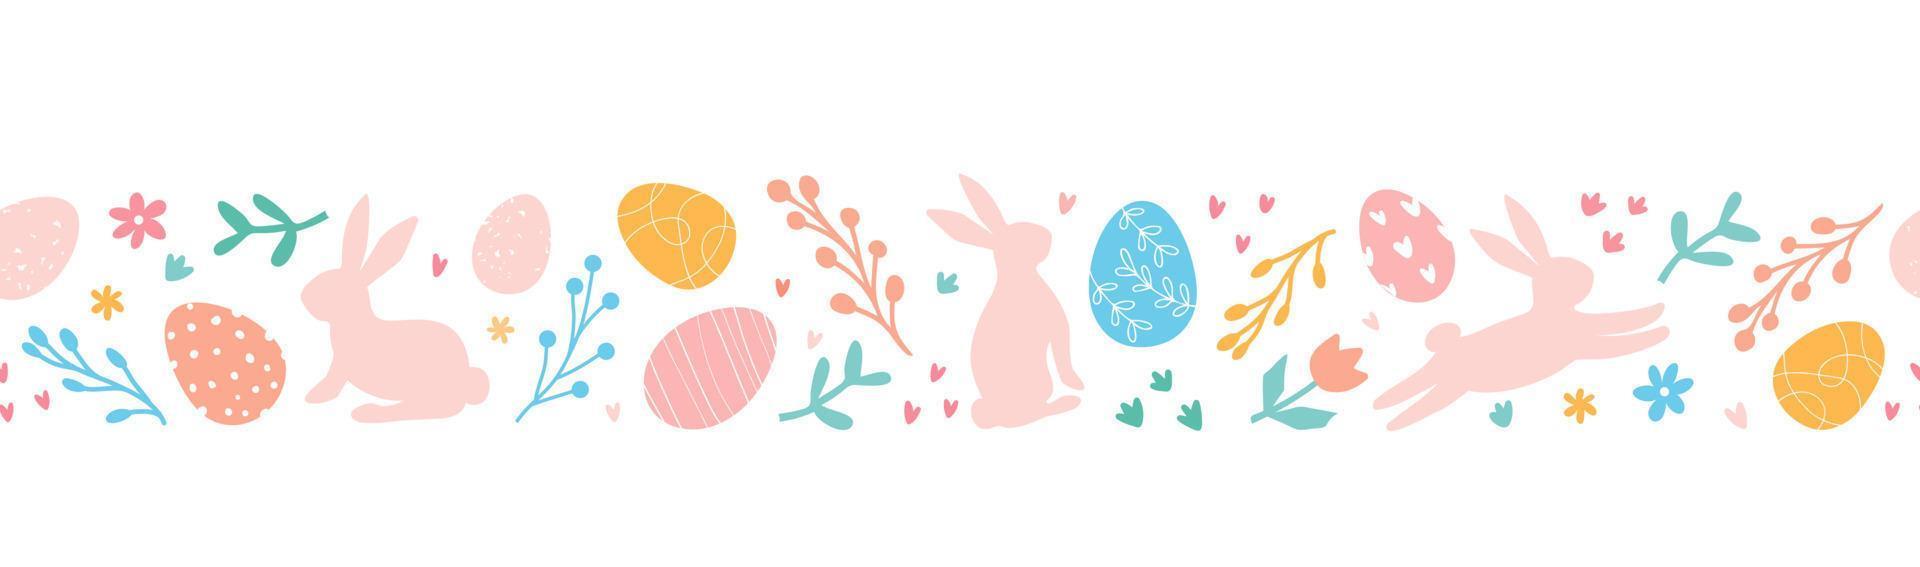 Lovely hand drawn Easter horizontal seamless pattern with doodle eggs, bunnies, flowers. Easter festive border. Suitable for textiles, banners, wallpaper, wrapping paper. vector